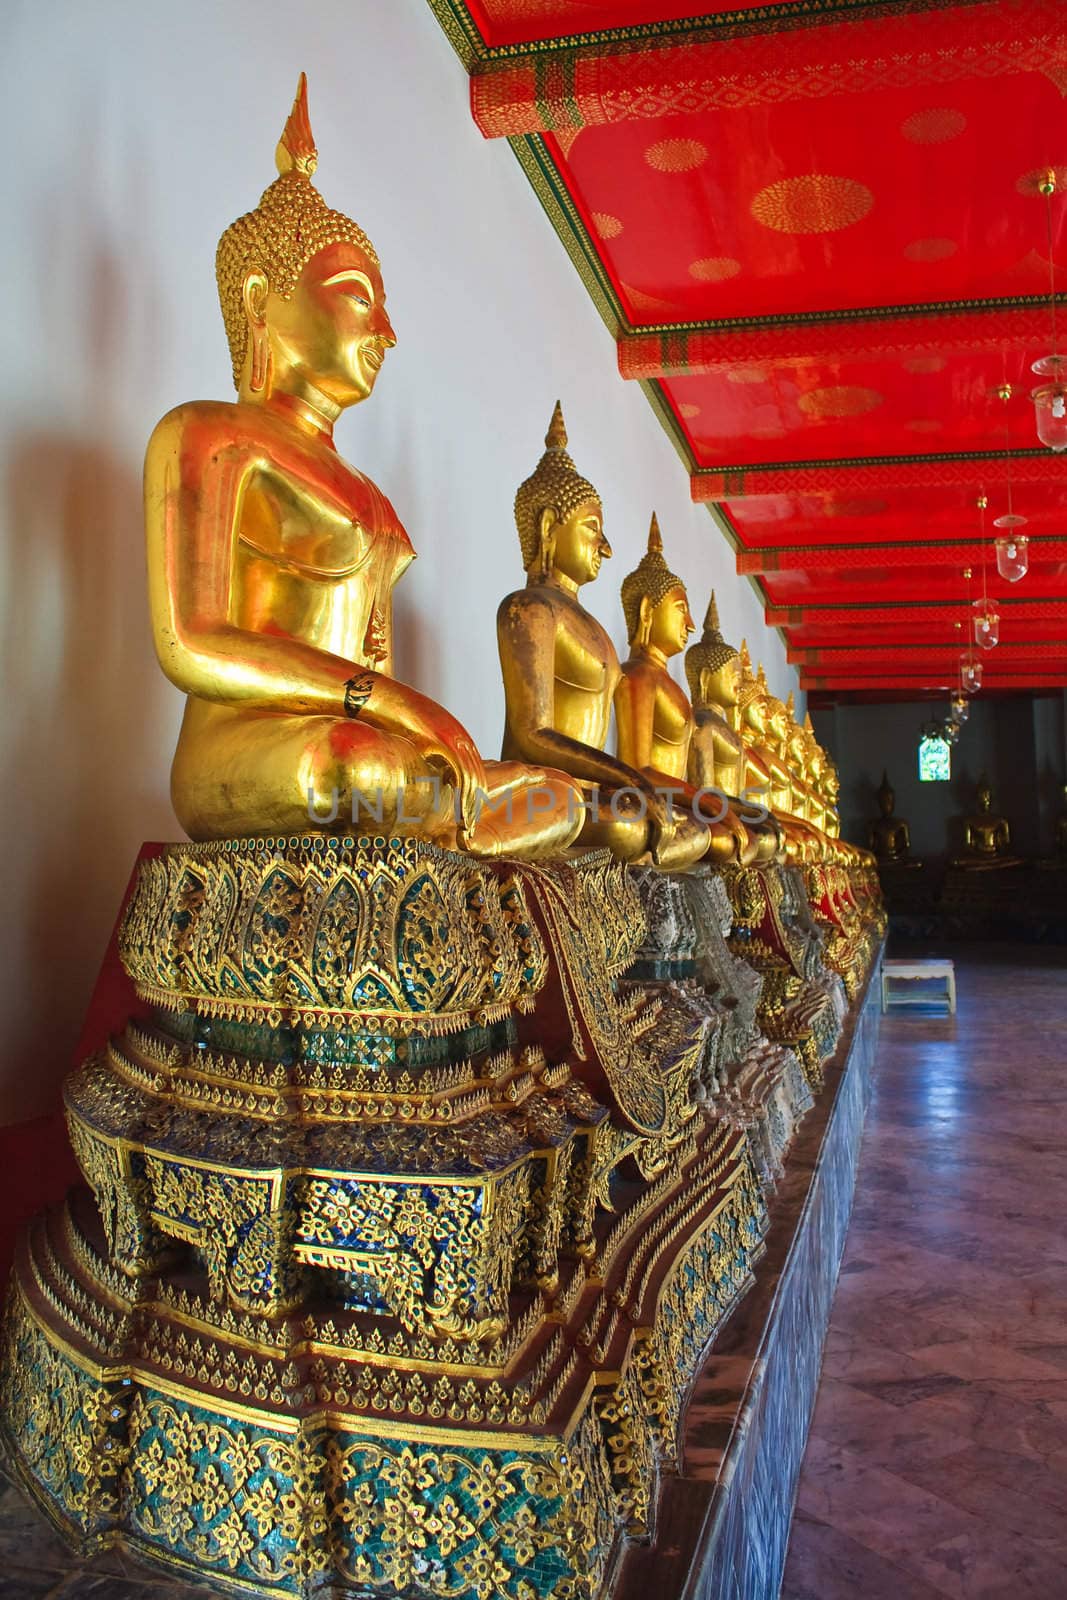 Images of Buddha in Wat Pho temple